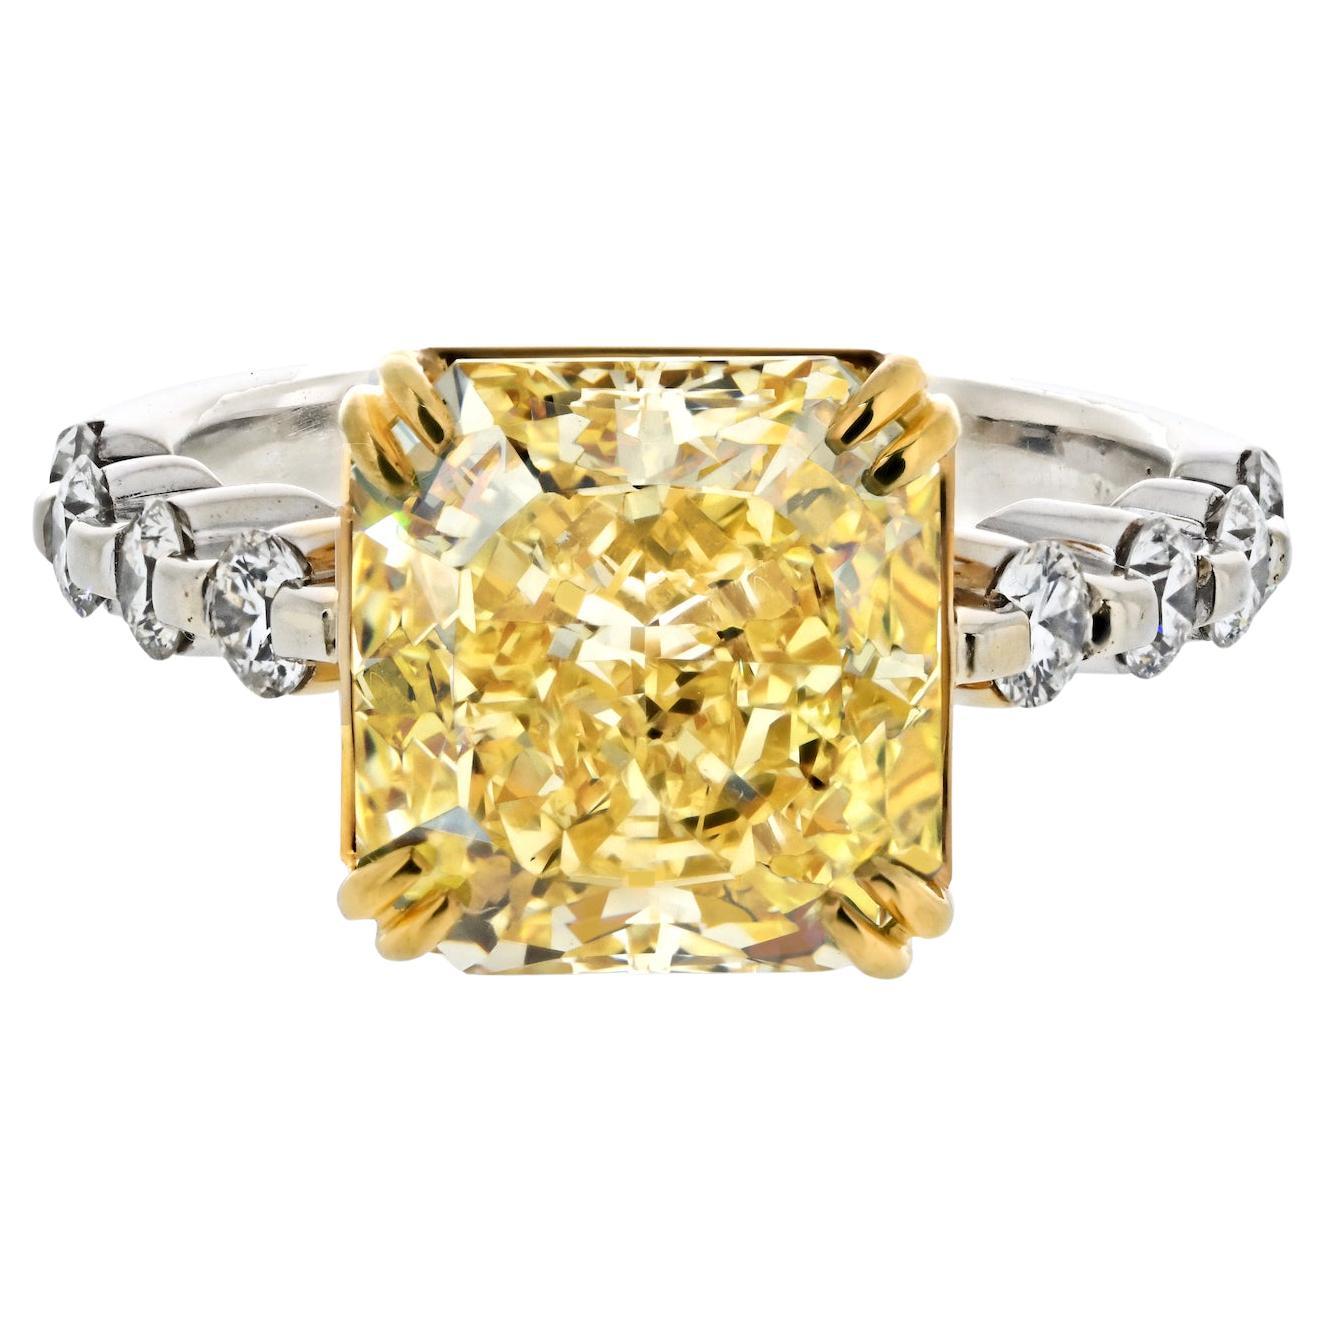 3.08ct Radiant Cut Fancy Yellow VVS2 GIA Diamond Engagement Ring For Sale